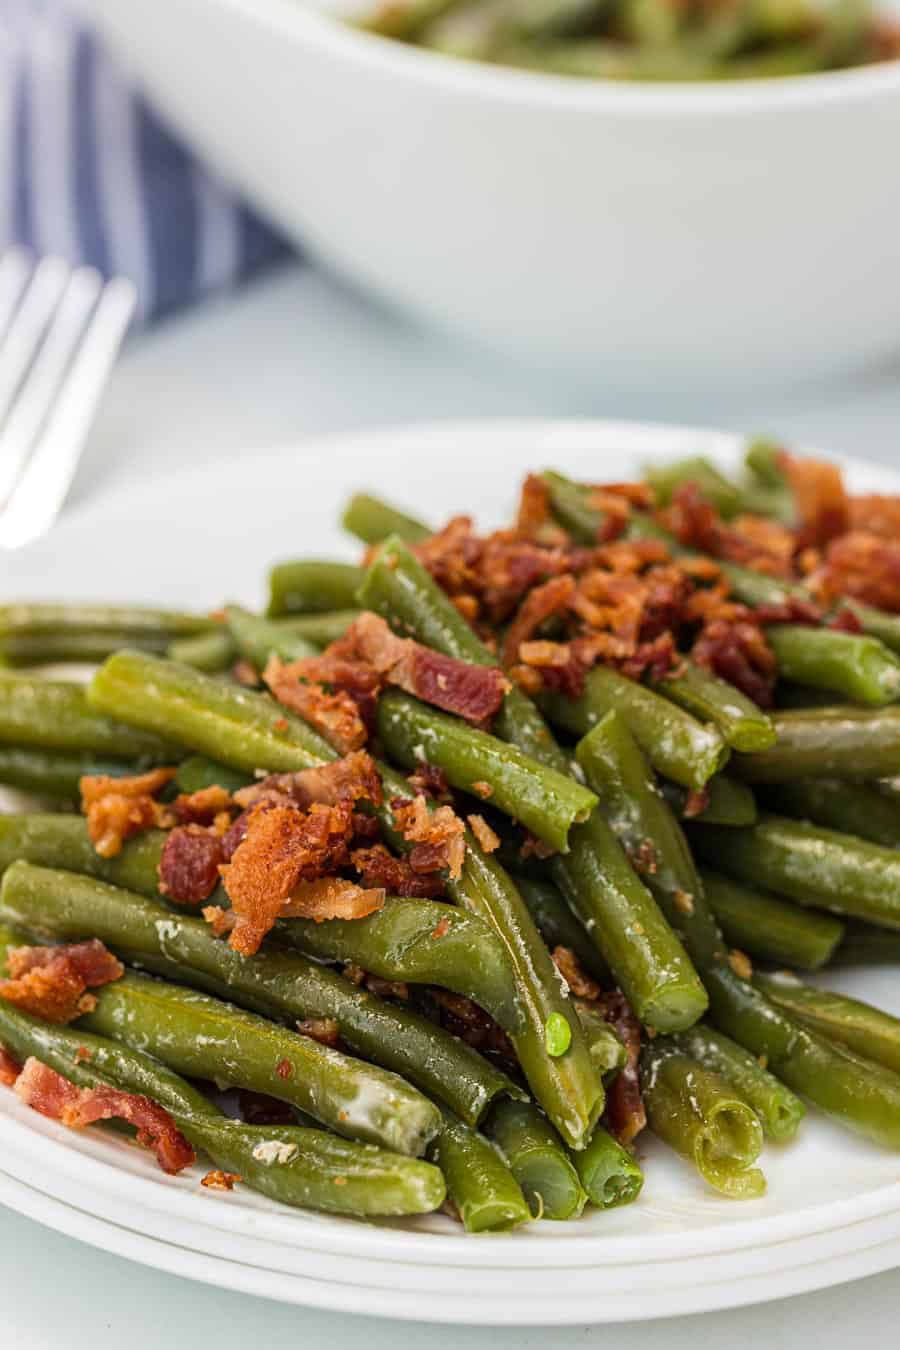 Green beans with butter and bacon is a hearty and flavor-filled side dish that takes green beans from plain to irresistible with just a handful of ingredients. #greenbeans #sides #sidedishes #veggiessides #bacon #southernsides 